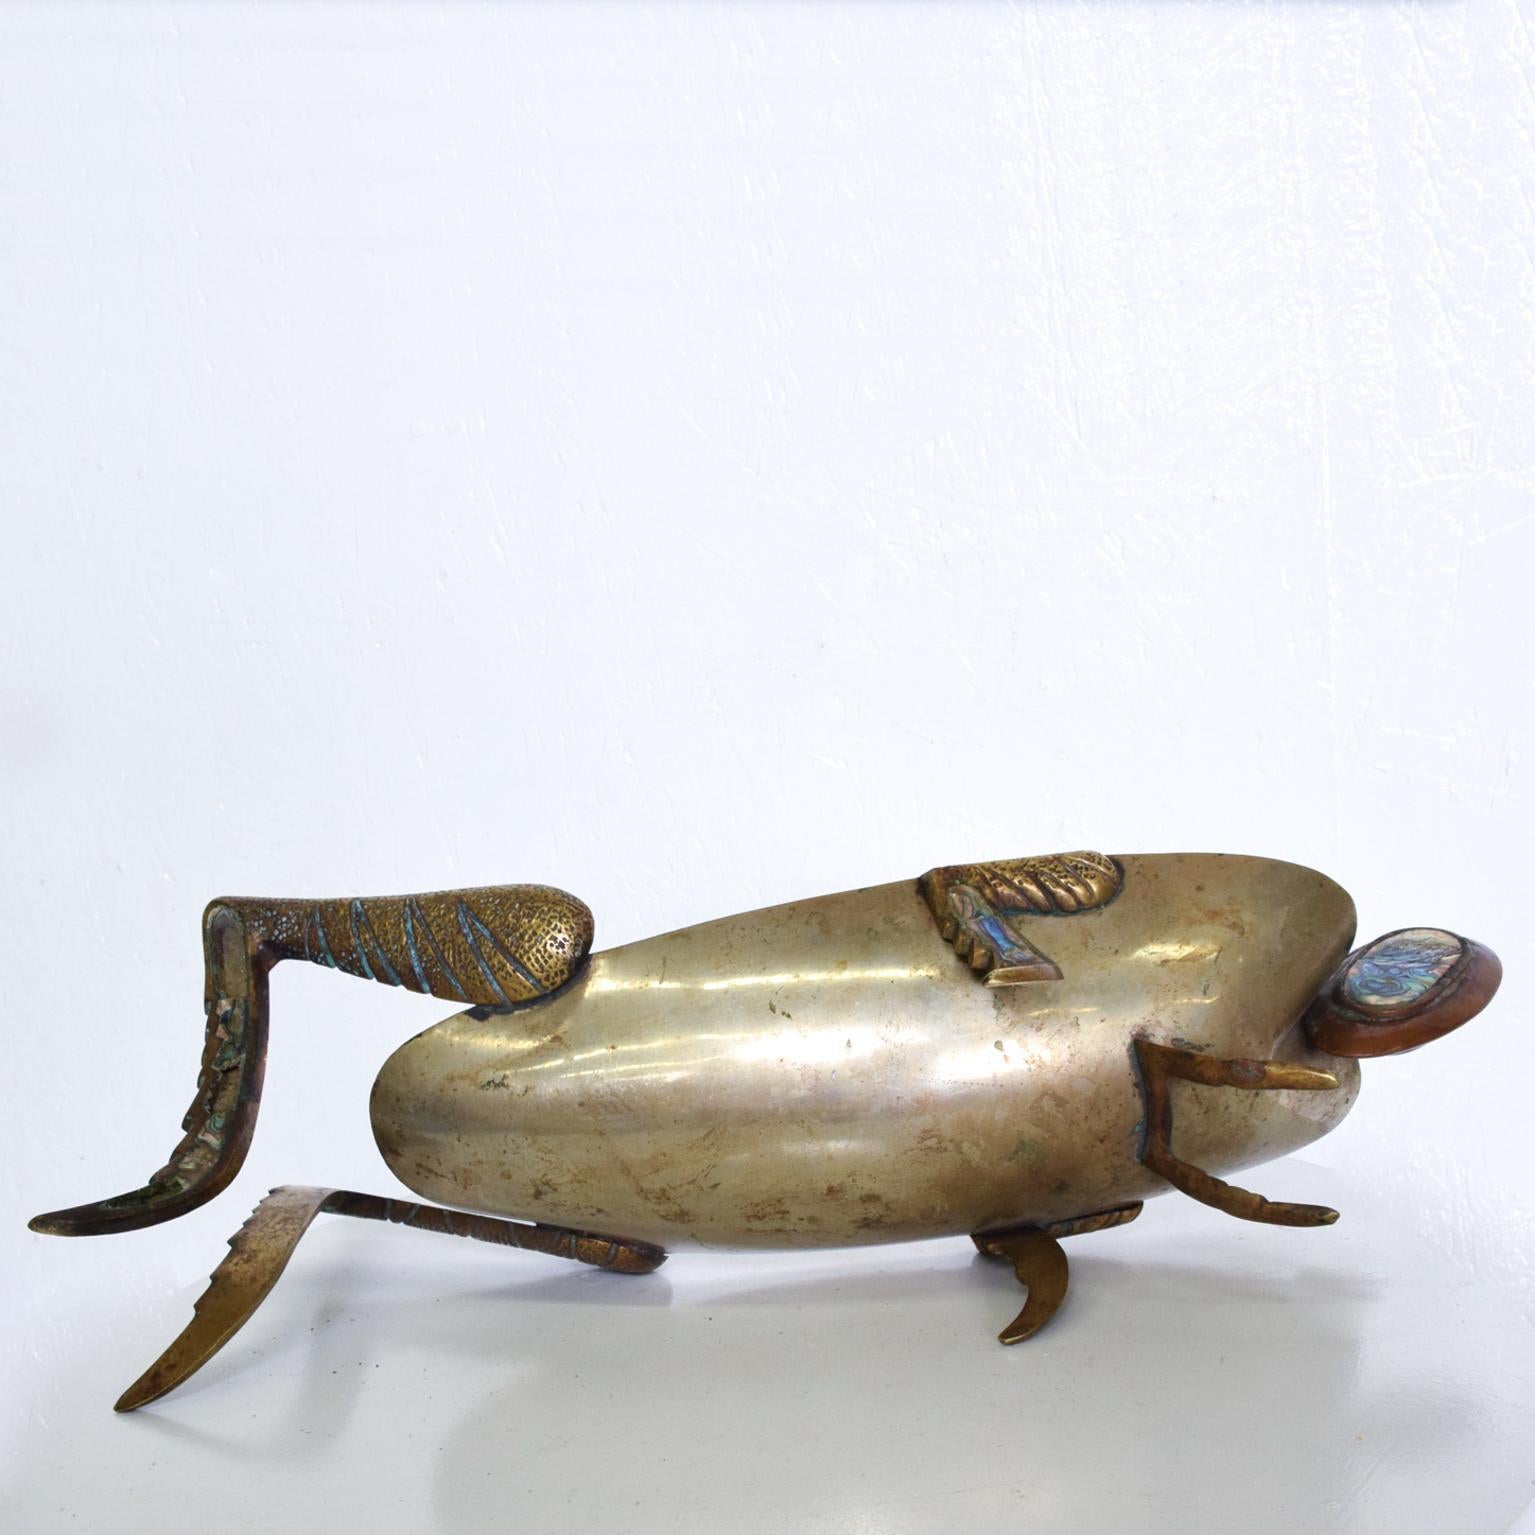 For your consideration, a decorative bowl with the shape of a grasshopper. Brass with the faded silverplated finish. Legs and eyes are decorated with abalone. Unmarked. Attributed/In the style of Los Castillo. Made in Mexico, Circa the 1970s.